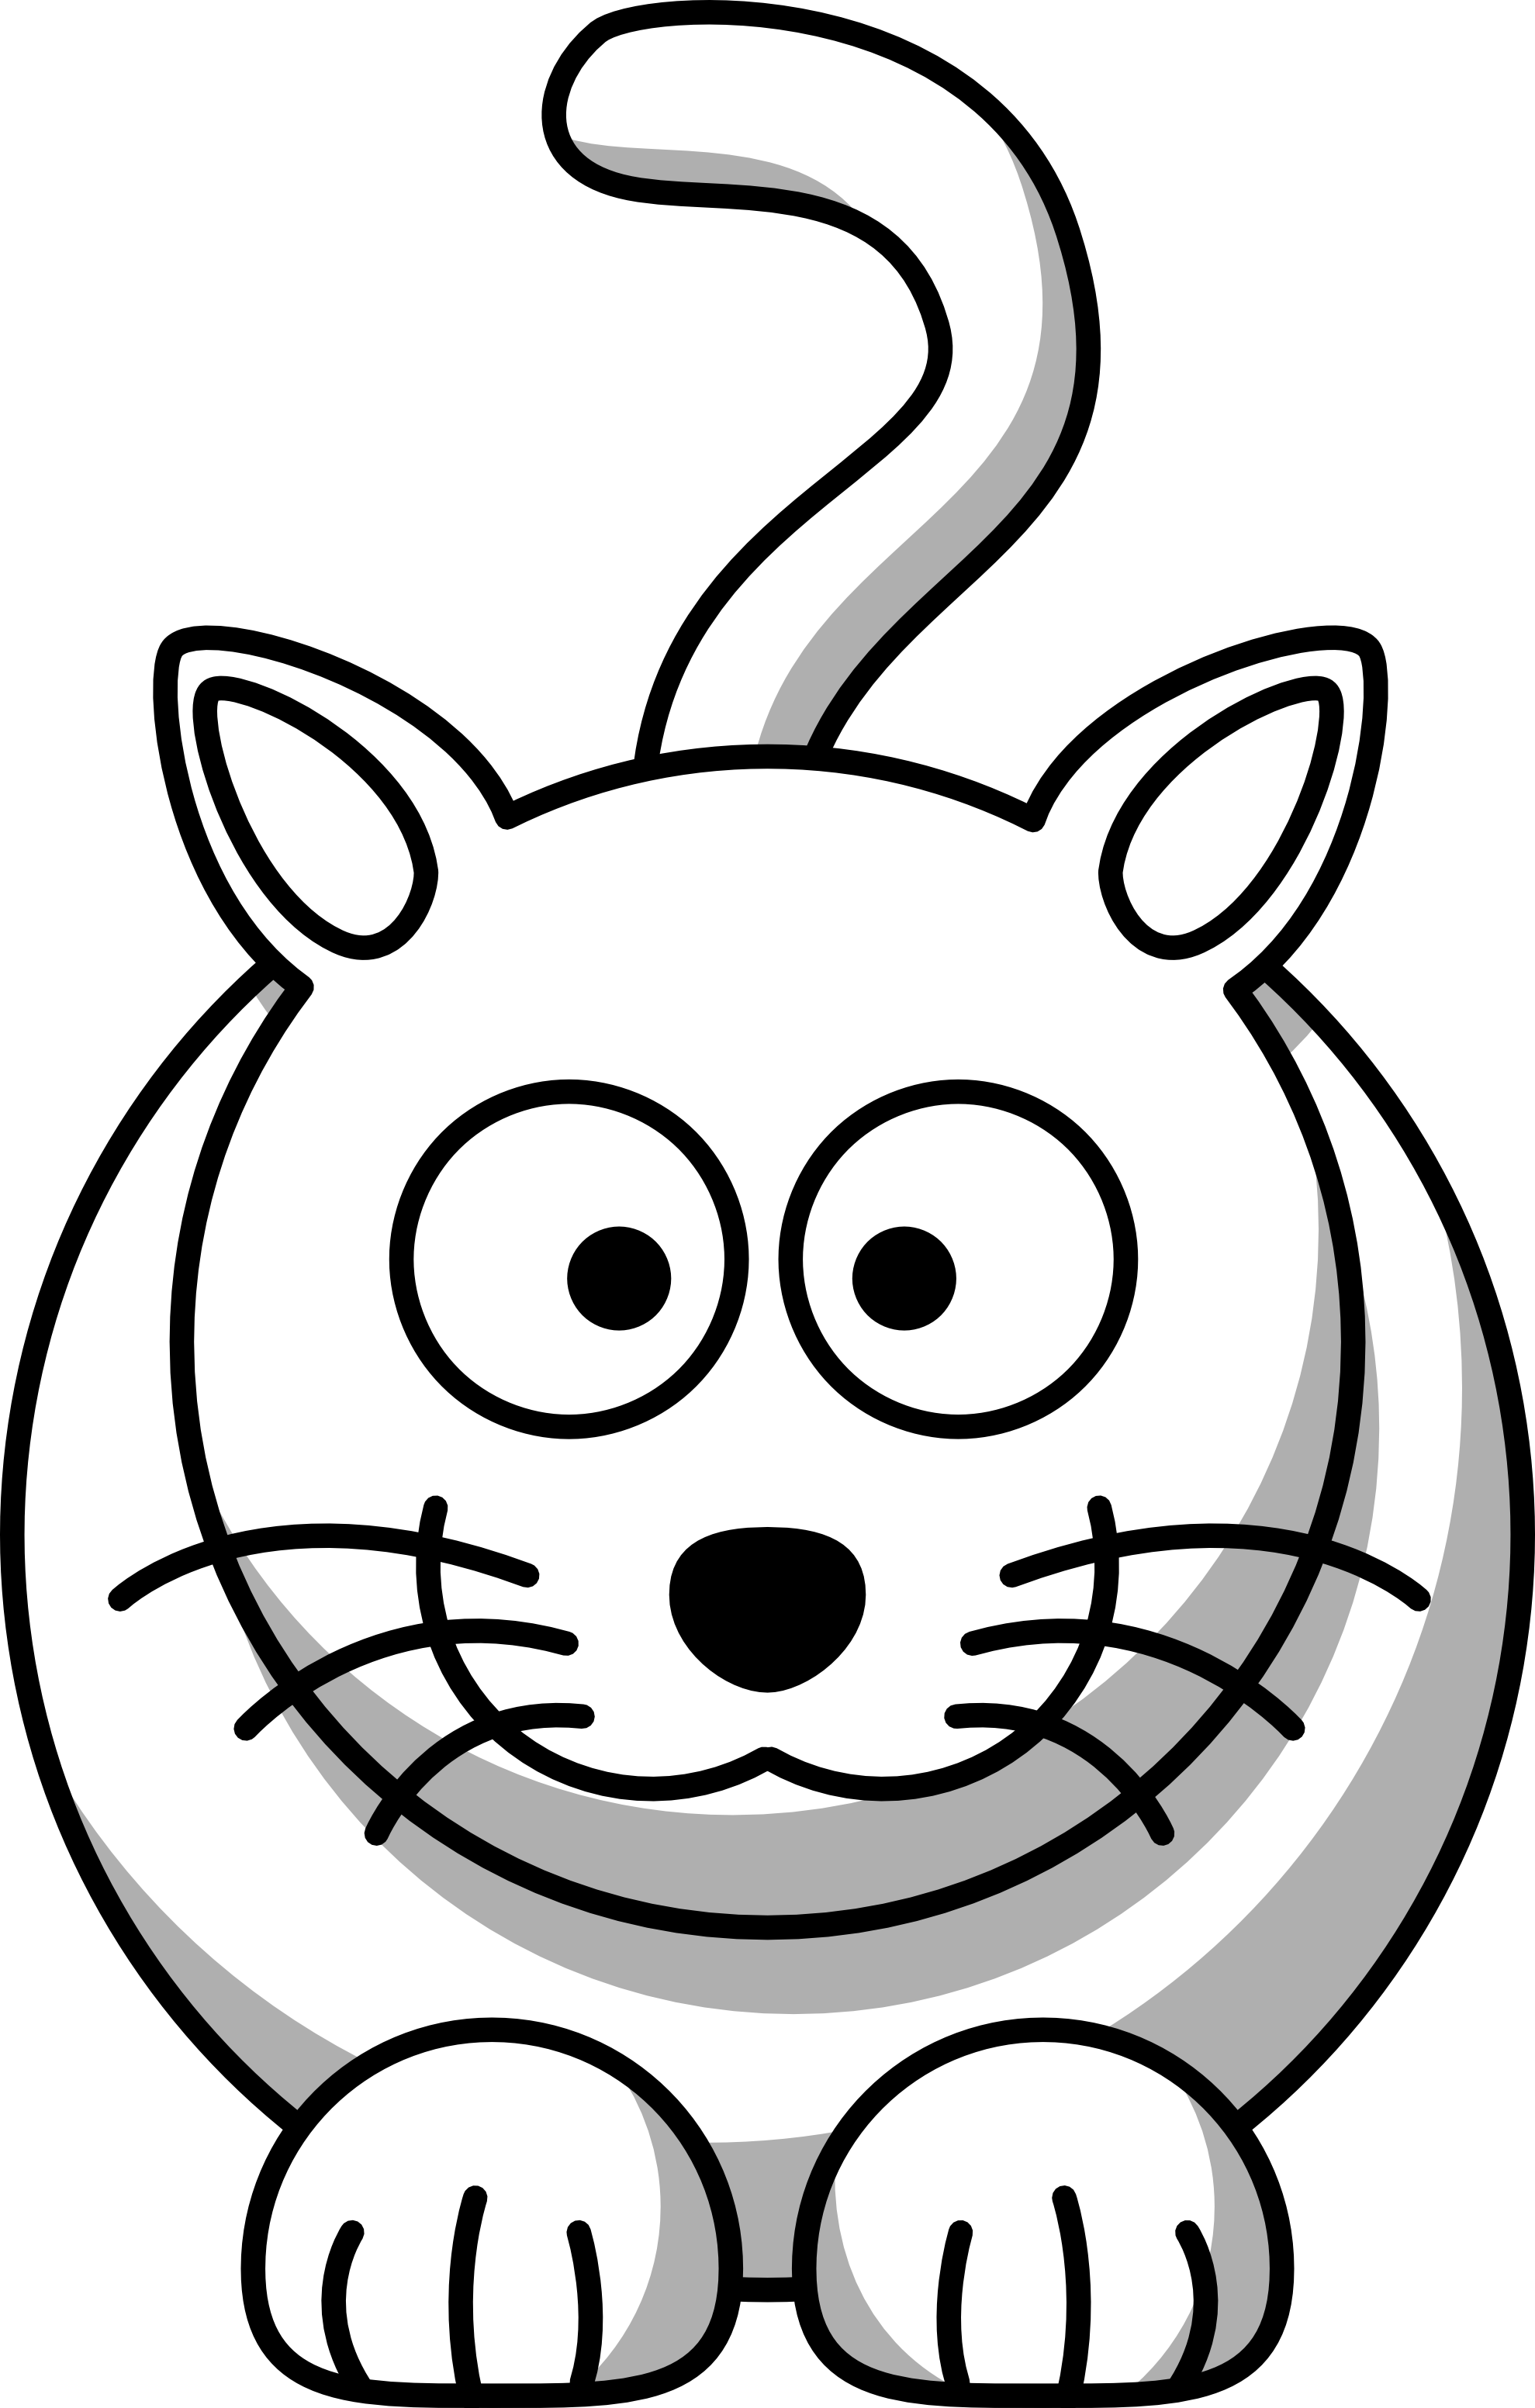 Free Cat Black And White Clipart, Download Free Cat Black And White